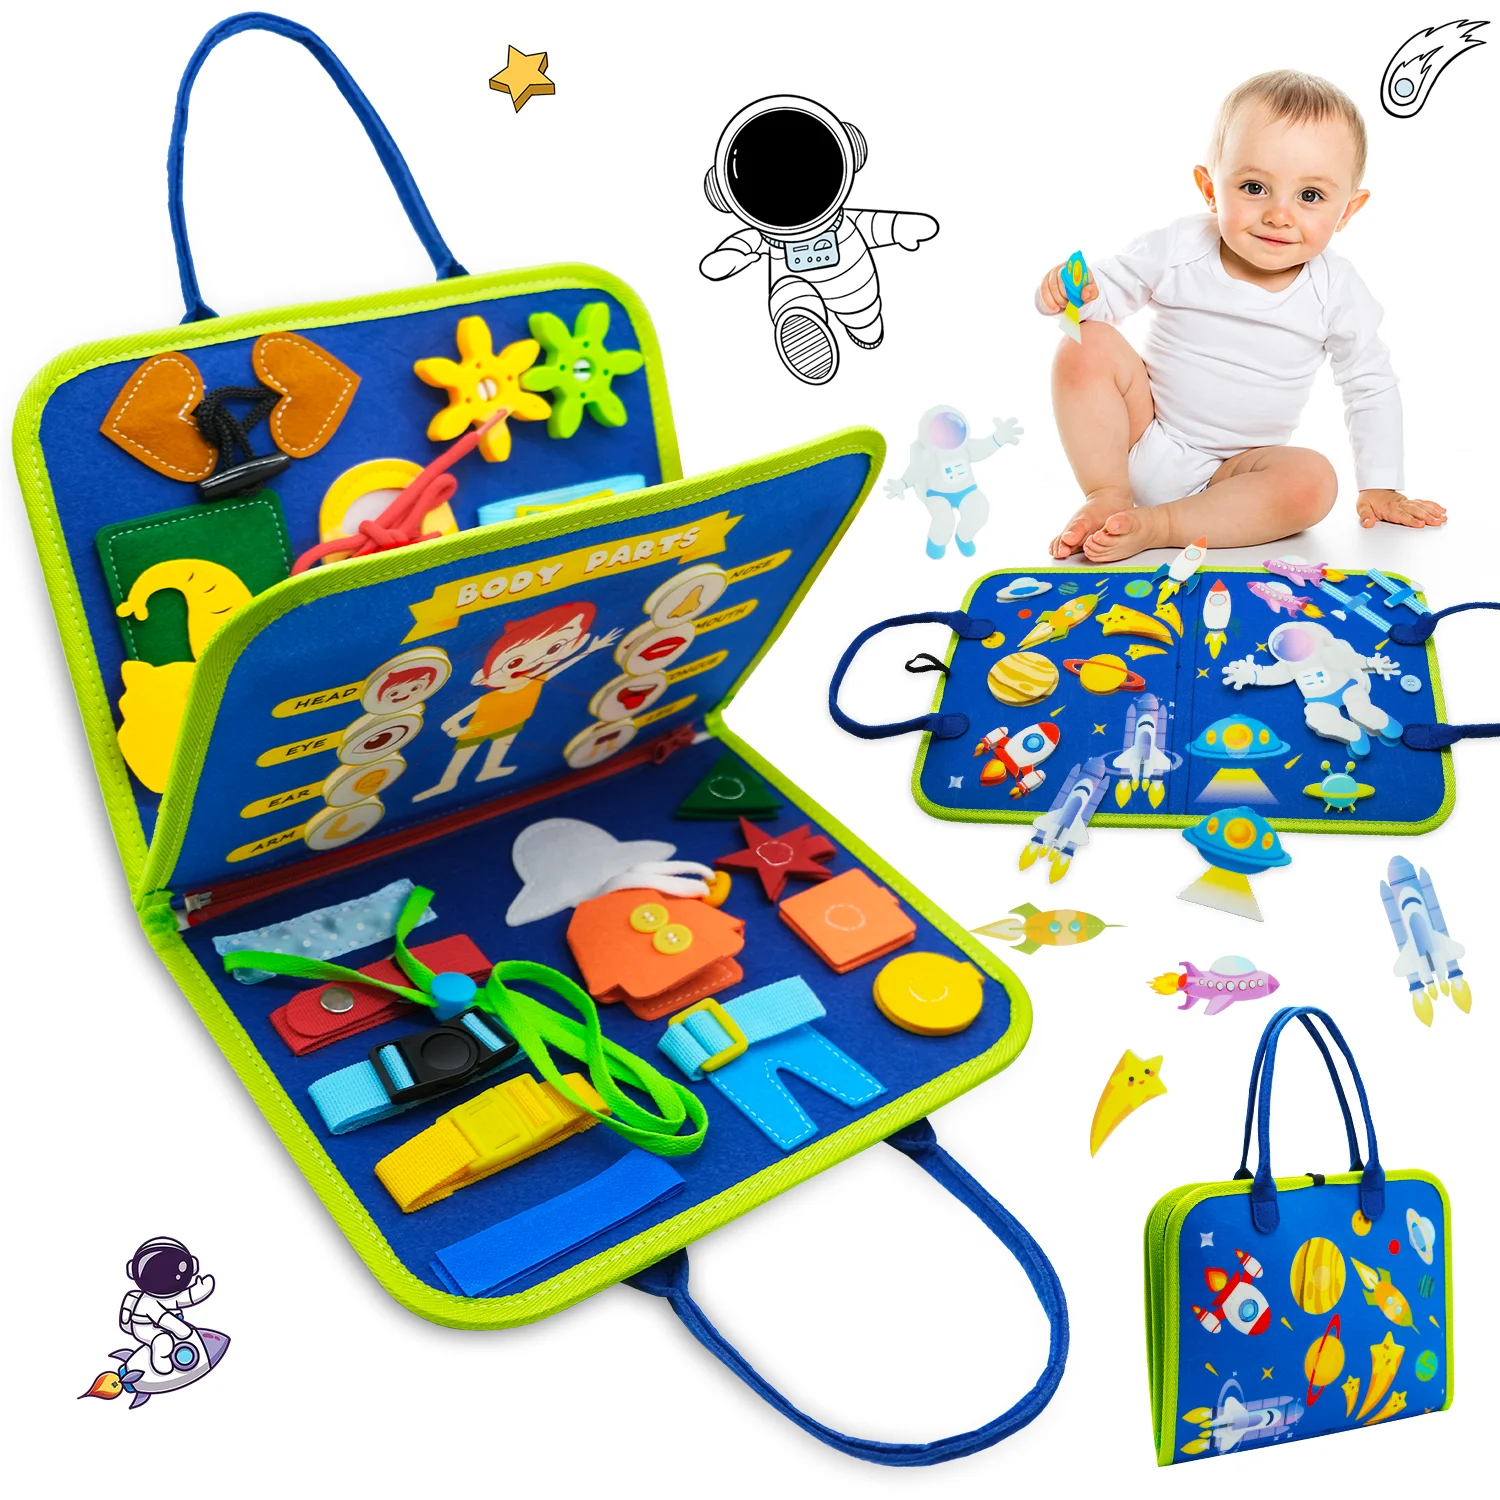 https://ae01.alicdn.com/kf/S496eaf257e6142fea926887b95c735e5J/Toddler-Storytelling-Board-Montessori-Busy-Board-Sensory-Early-Educational-Toy-for-Basic-Skill.png